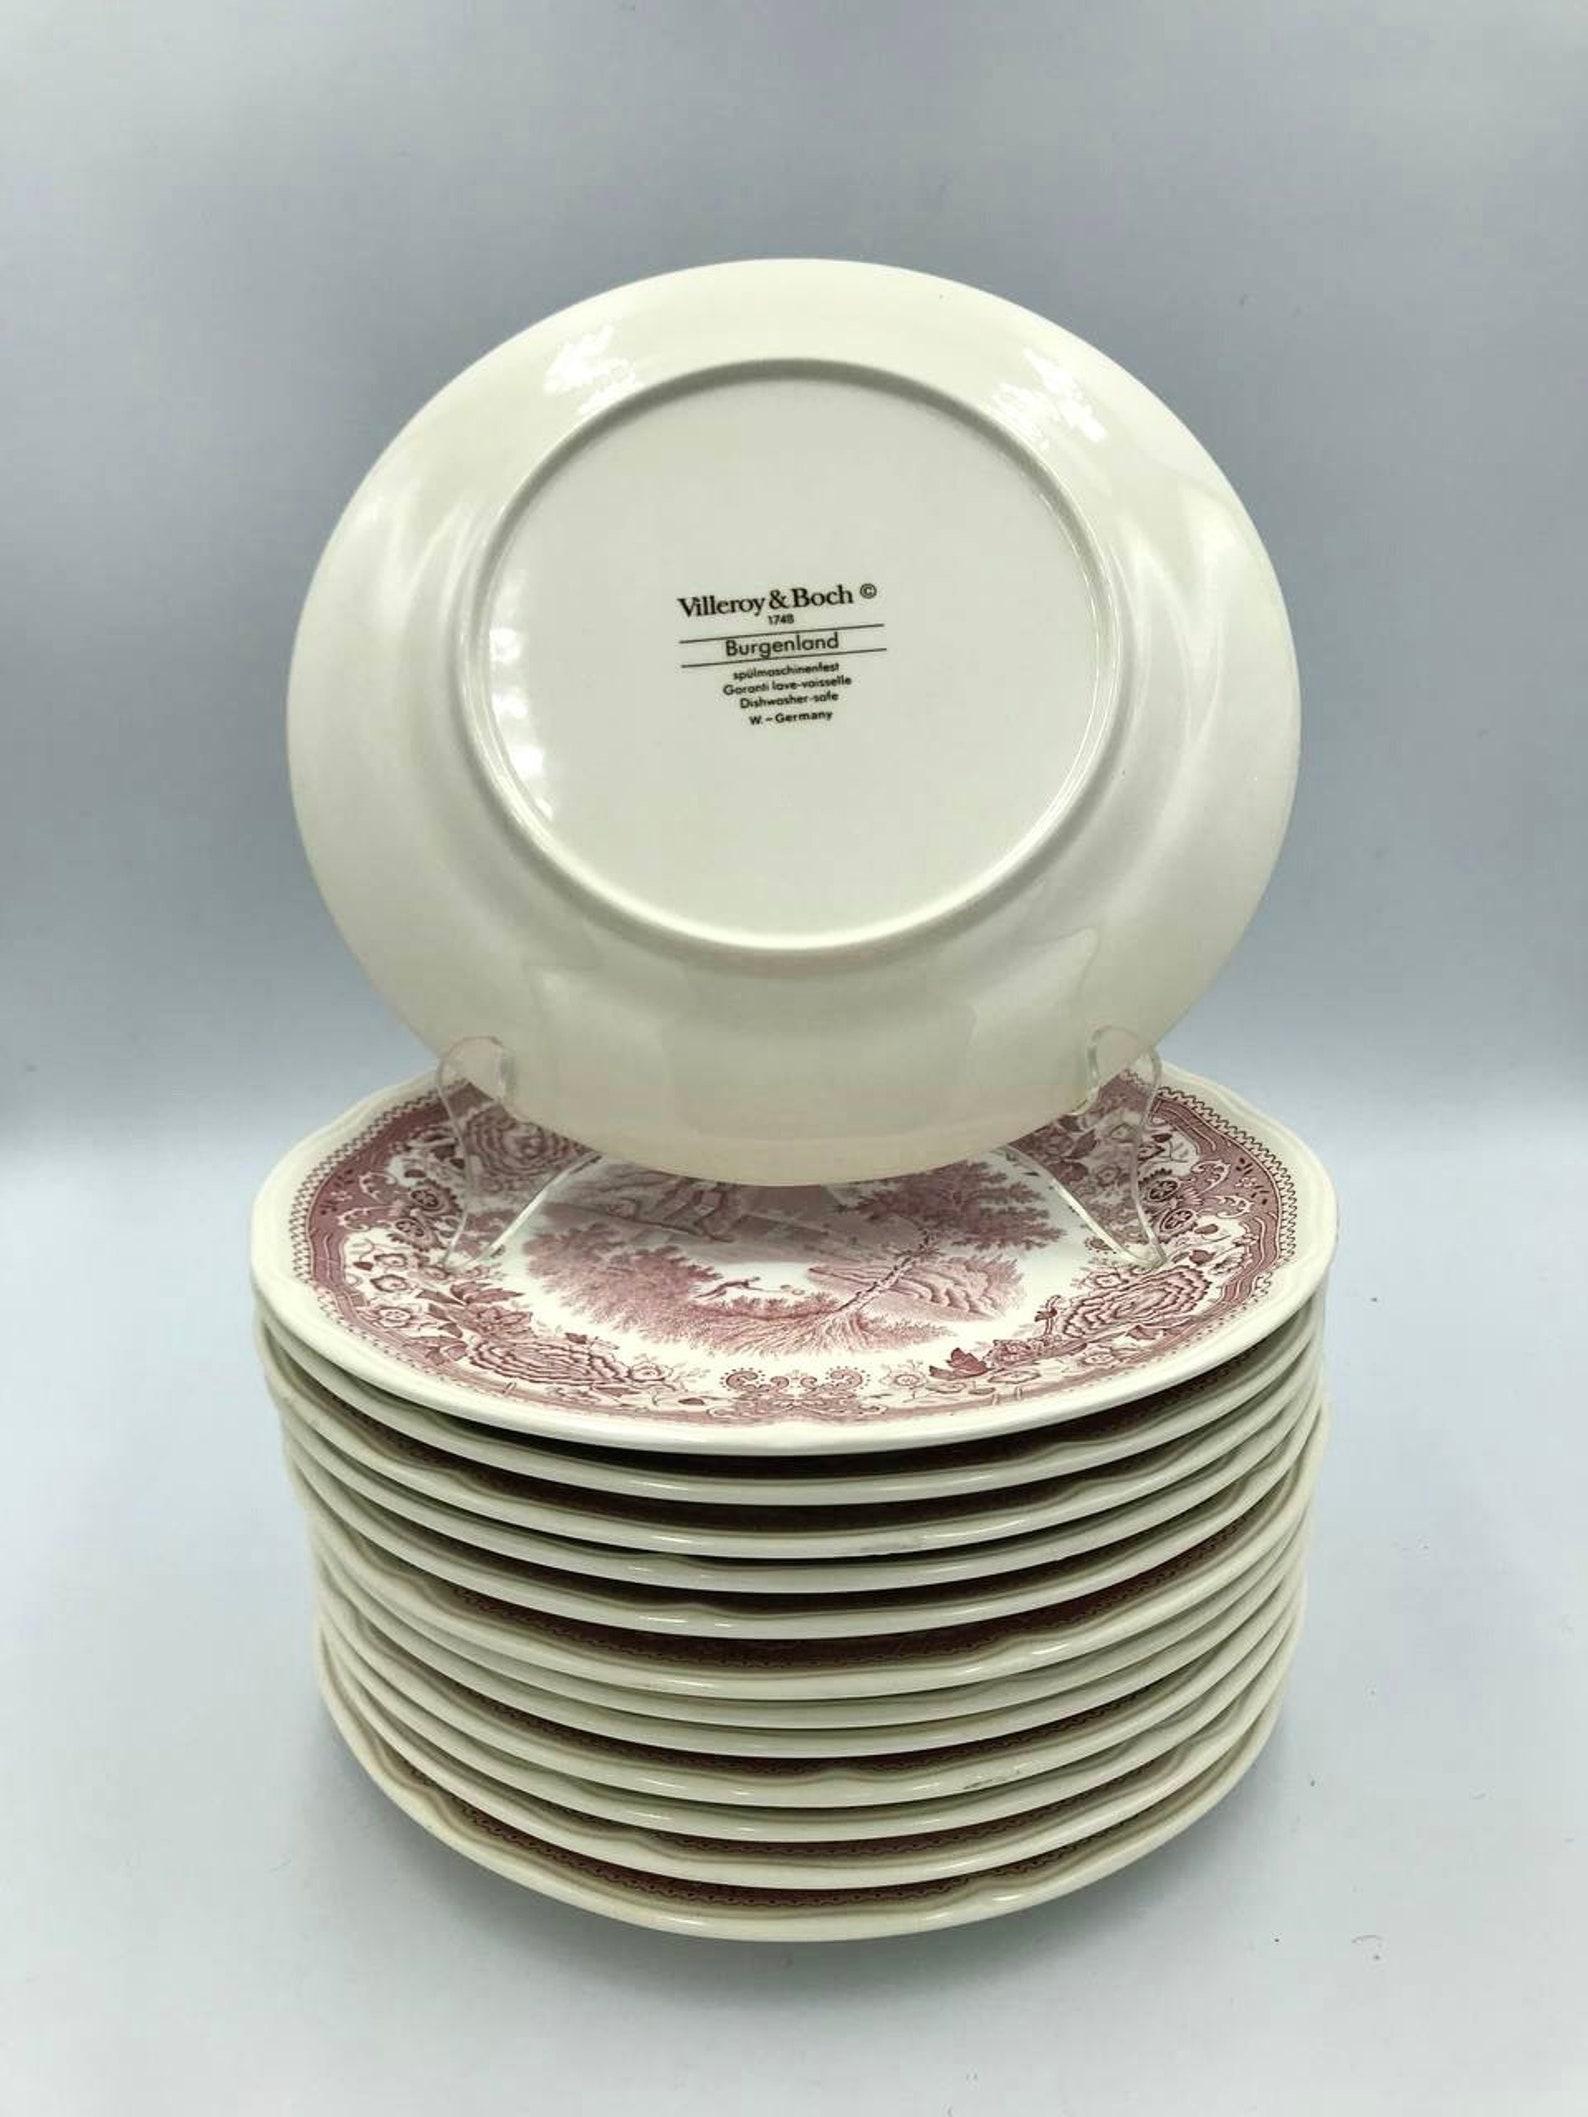 Villeroy & Boch Red Burgenland. 

Villeroy and Boch Dinner Plates.

In excellent condition, no chips, cracks or crazing. 

Burgenland is one of Villeroy & Boch’s most iconic patterns.

It was produced from 1930 to 2002.

Vintage.

The